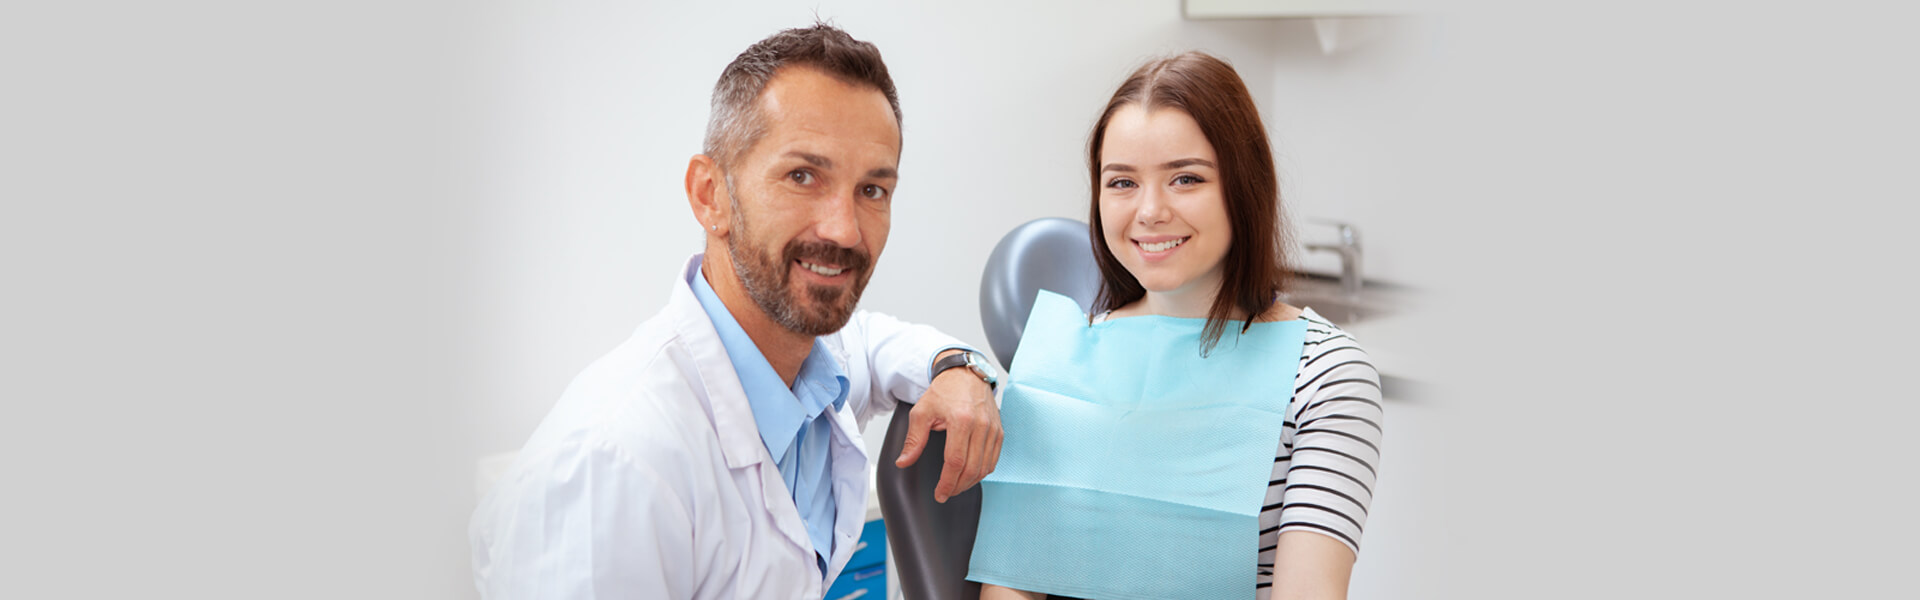 Dental Implant Types: Which One Is Best Suited for You?